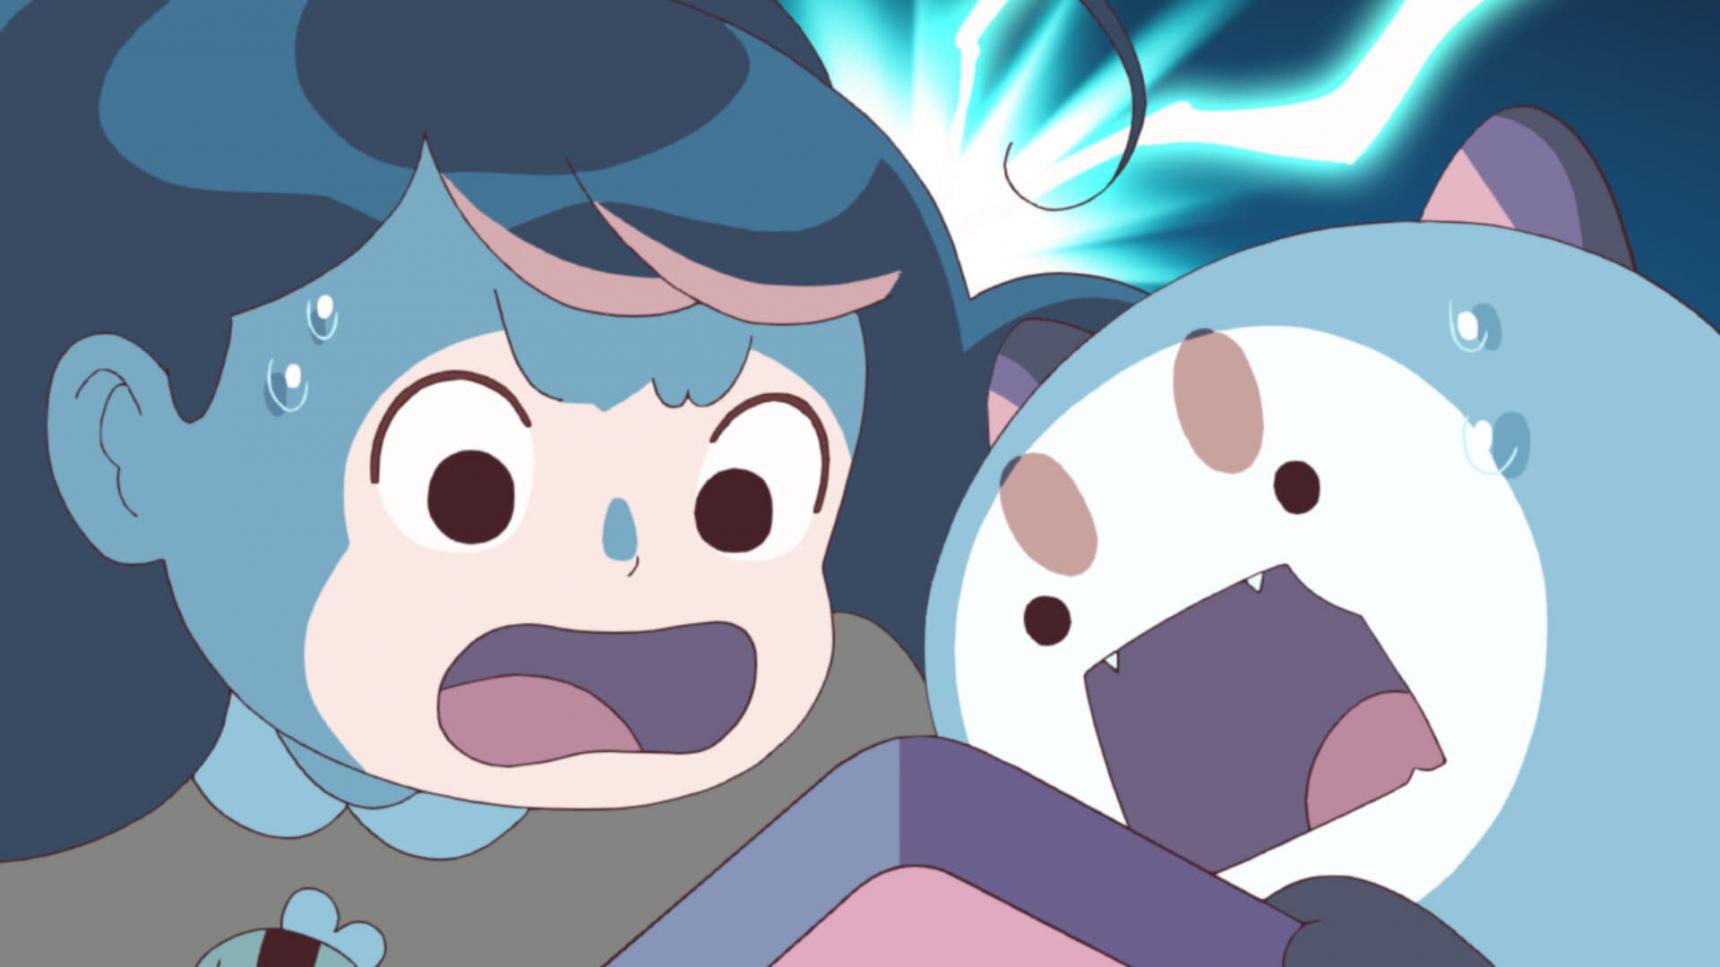 Poster del episodio 5 de Bee and PuppyCat: Lazy in Space online